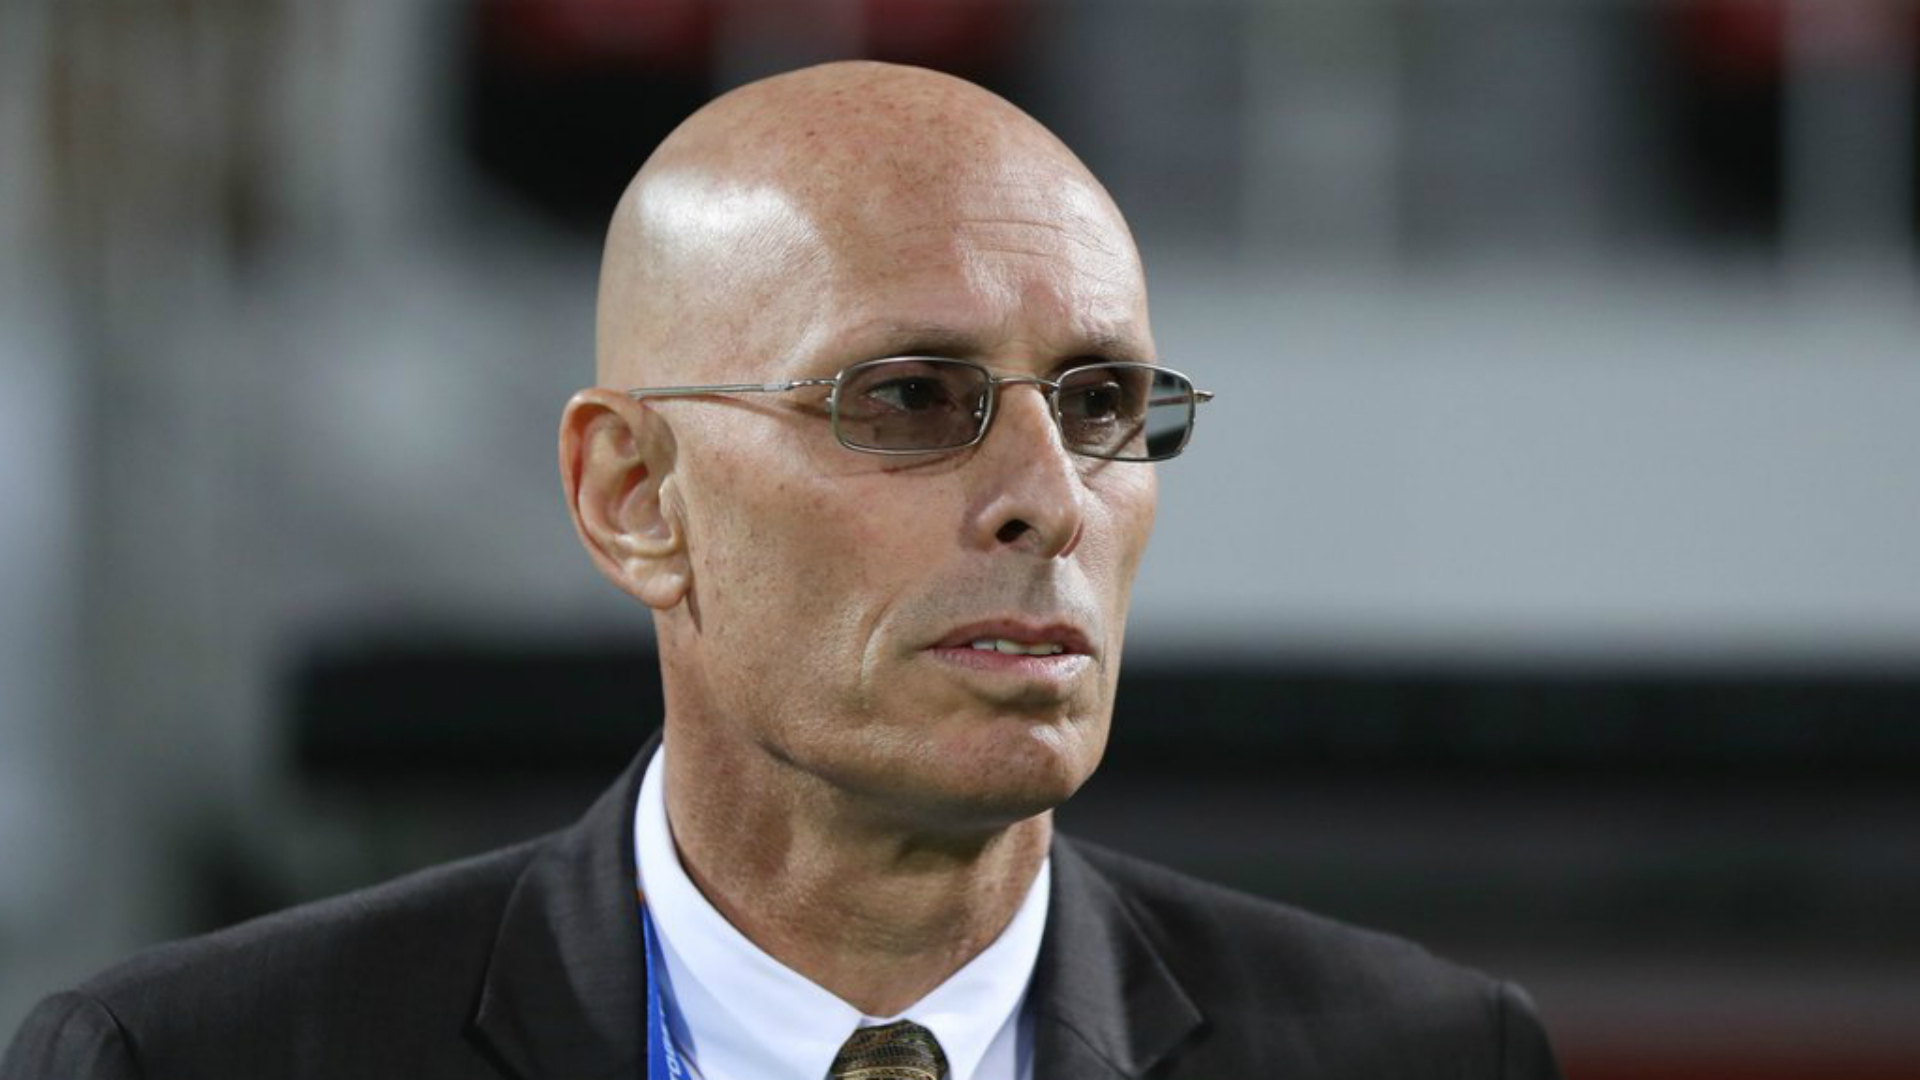 India coach resigns after Asian Cup disappointment